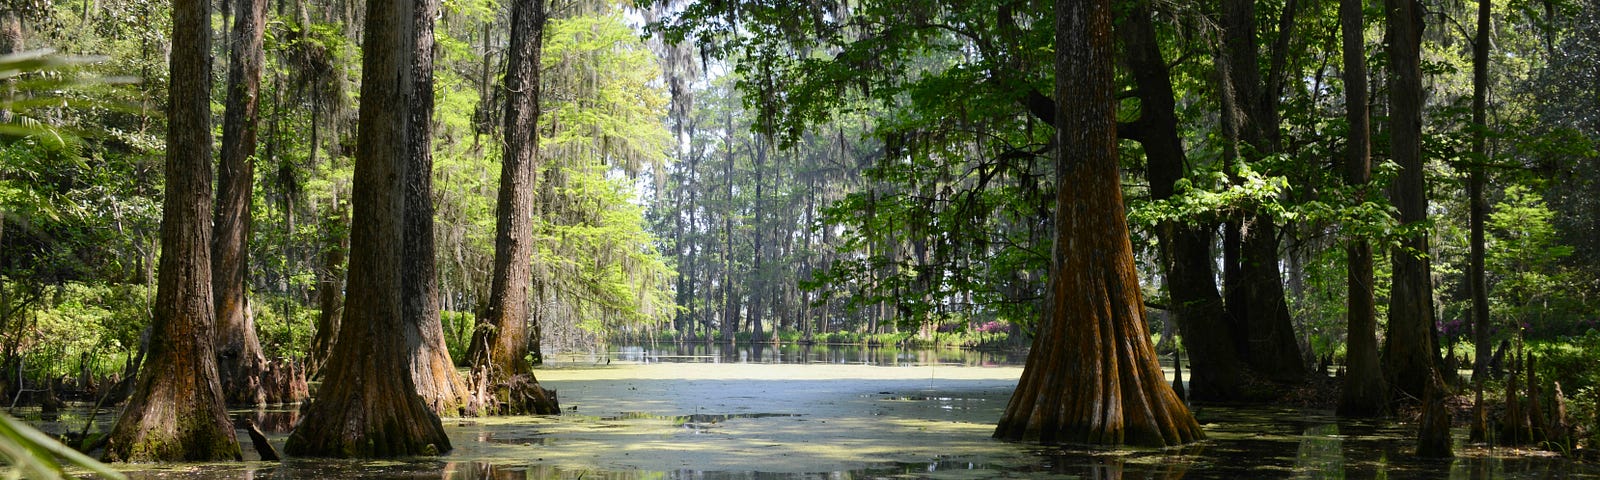 Photo of a swampland or bayou